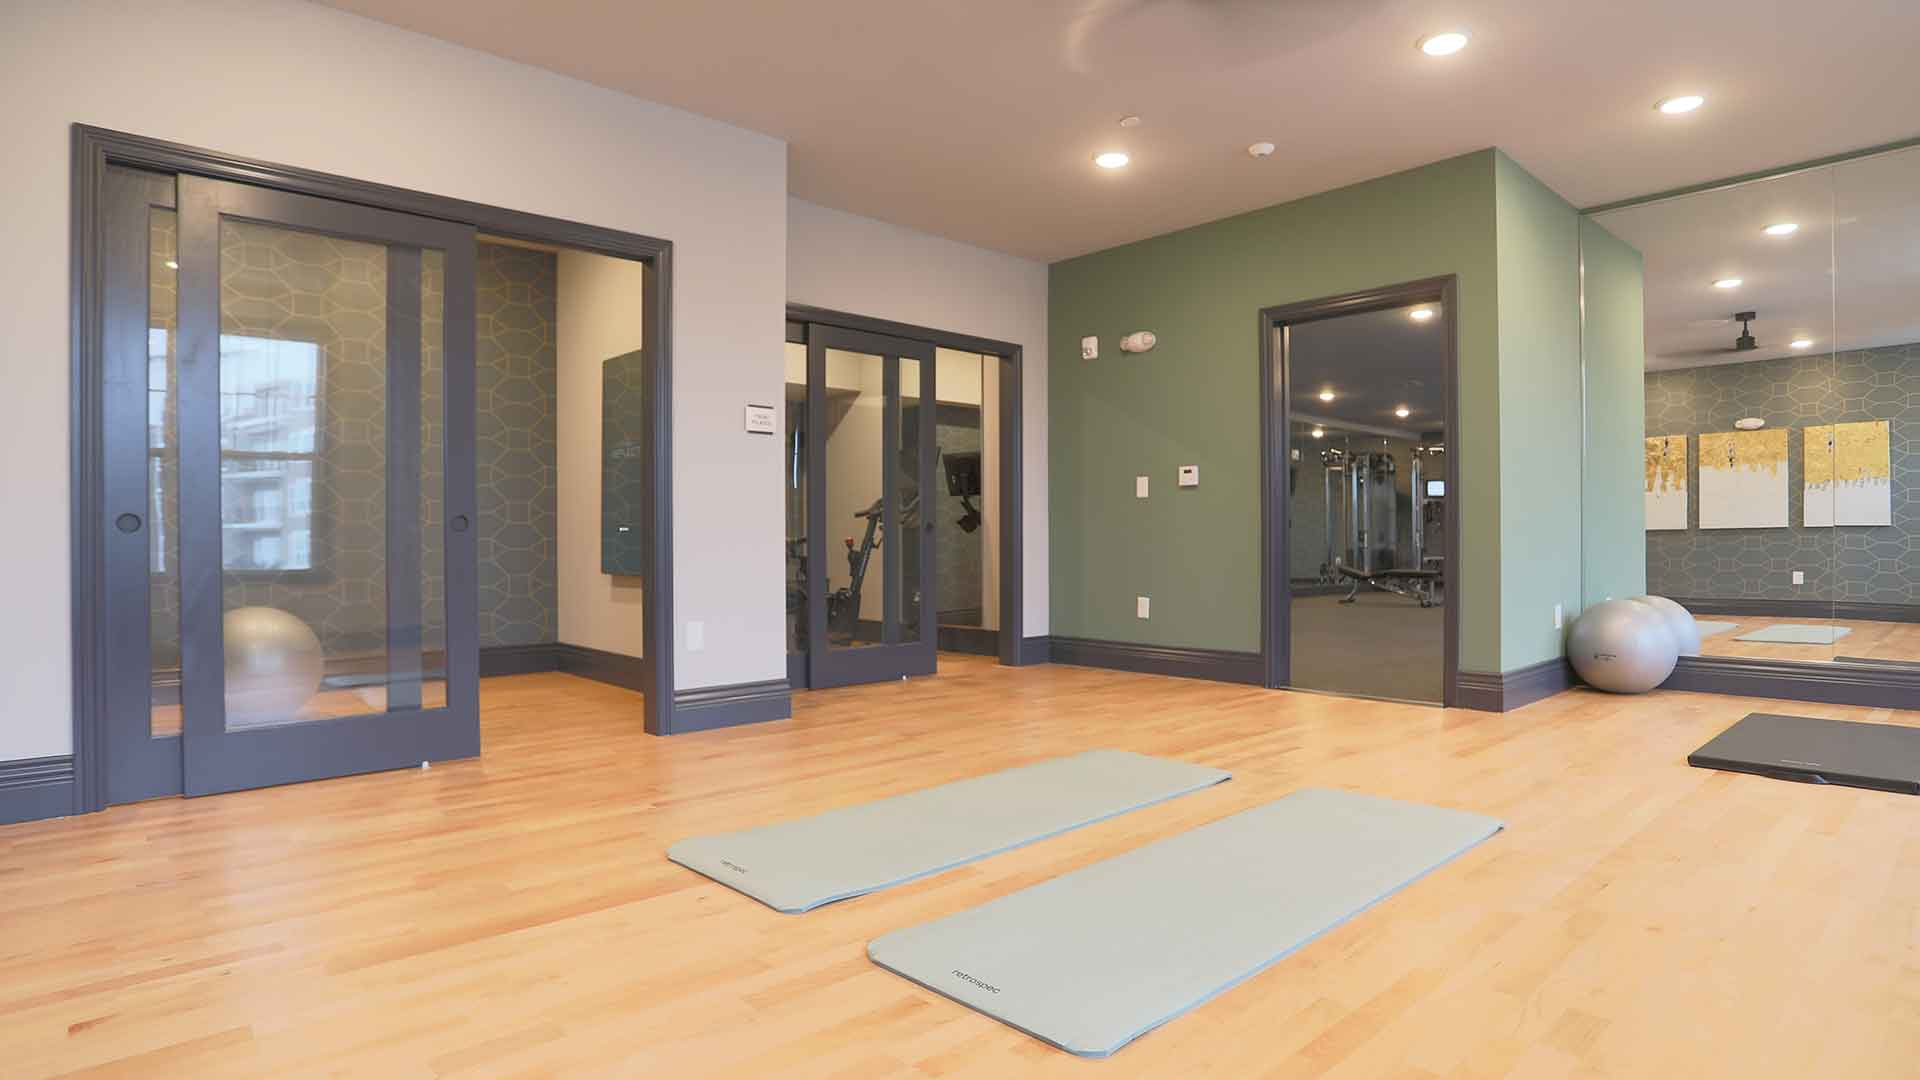 Spacious fitness area with open floor space and private rooms with sliding doors at Rialto on Hurstbourne.